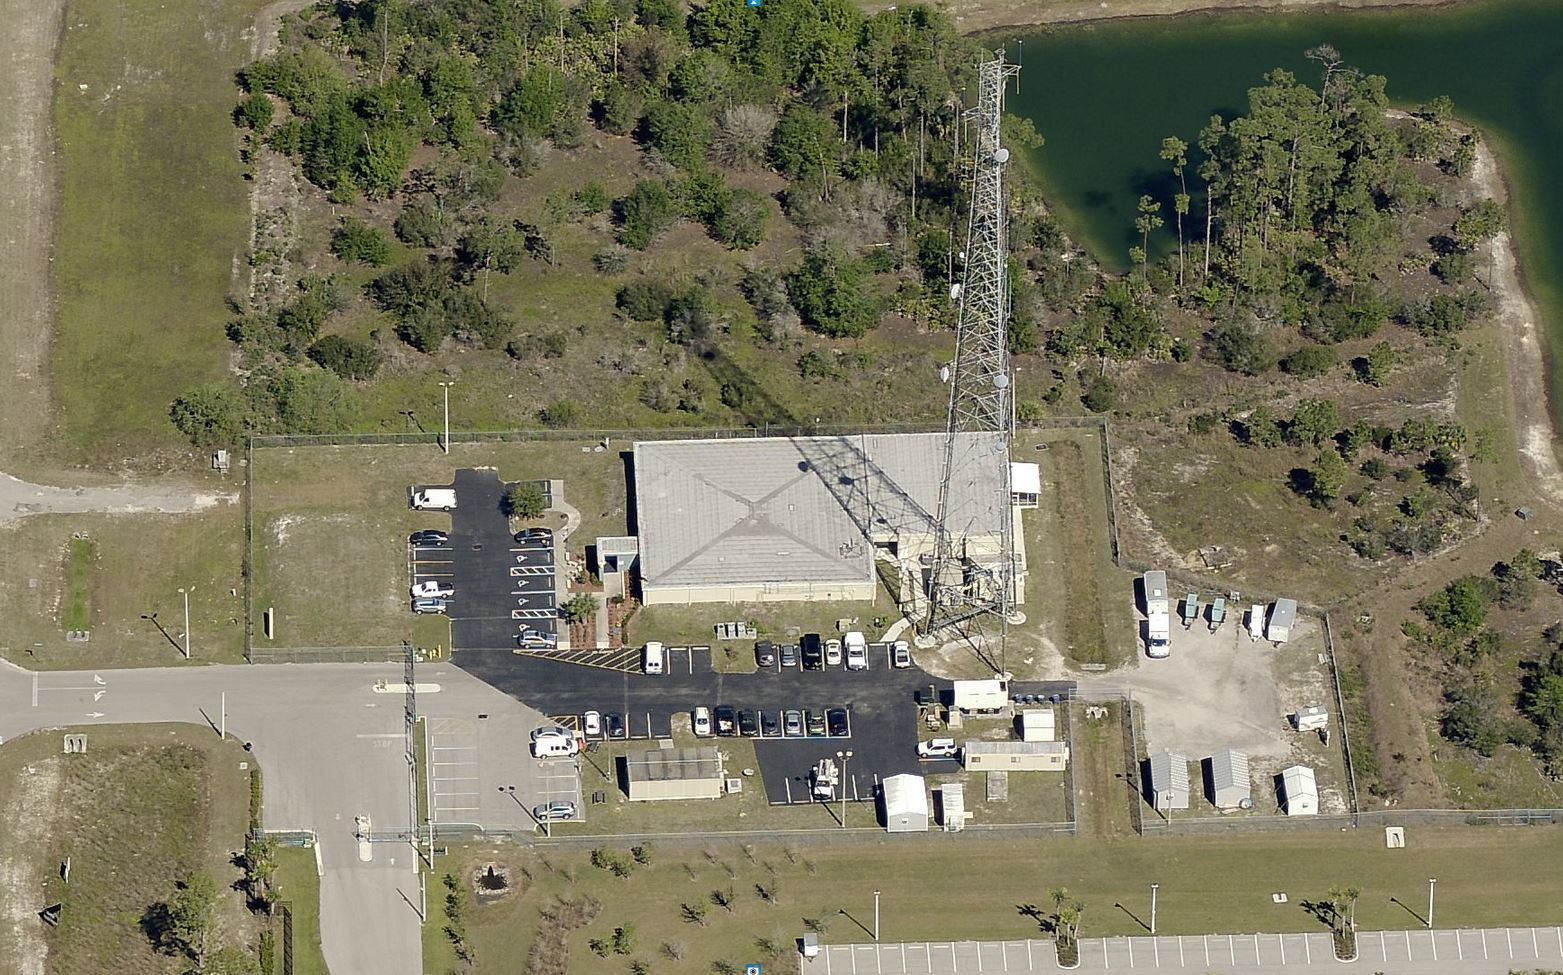 Lee County Emergency Dispatch Center aerial view